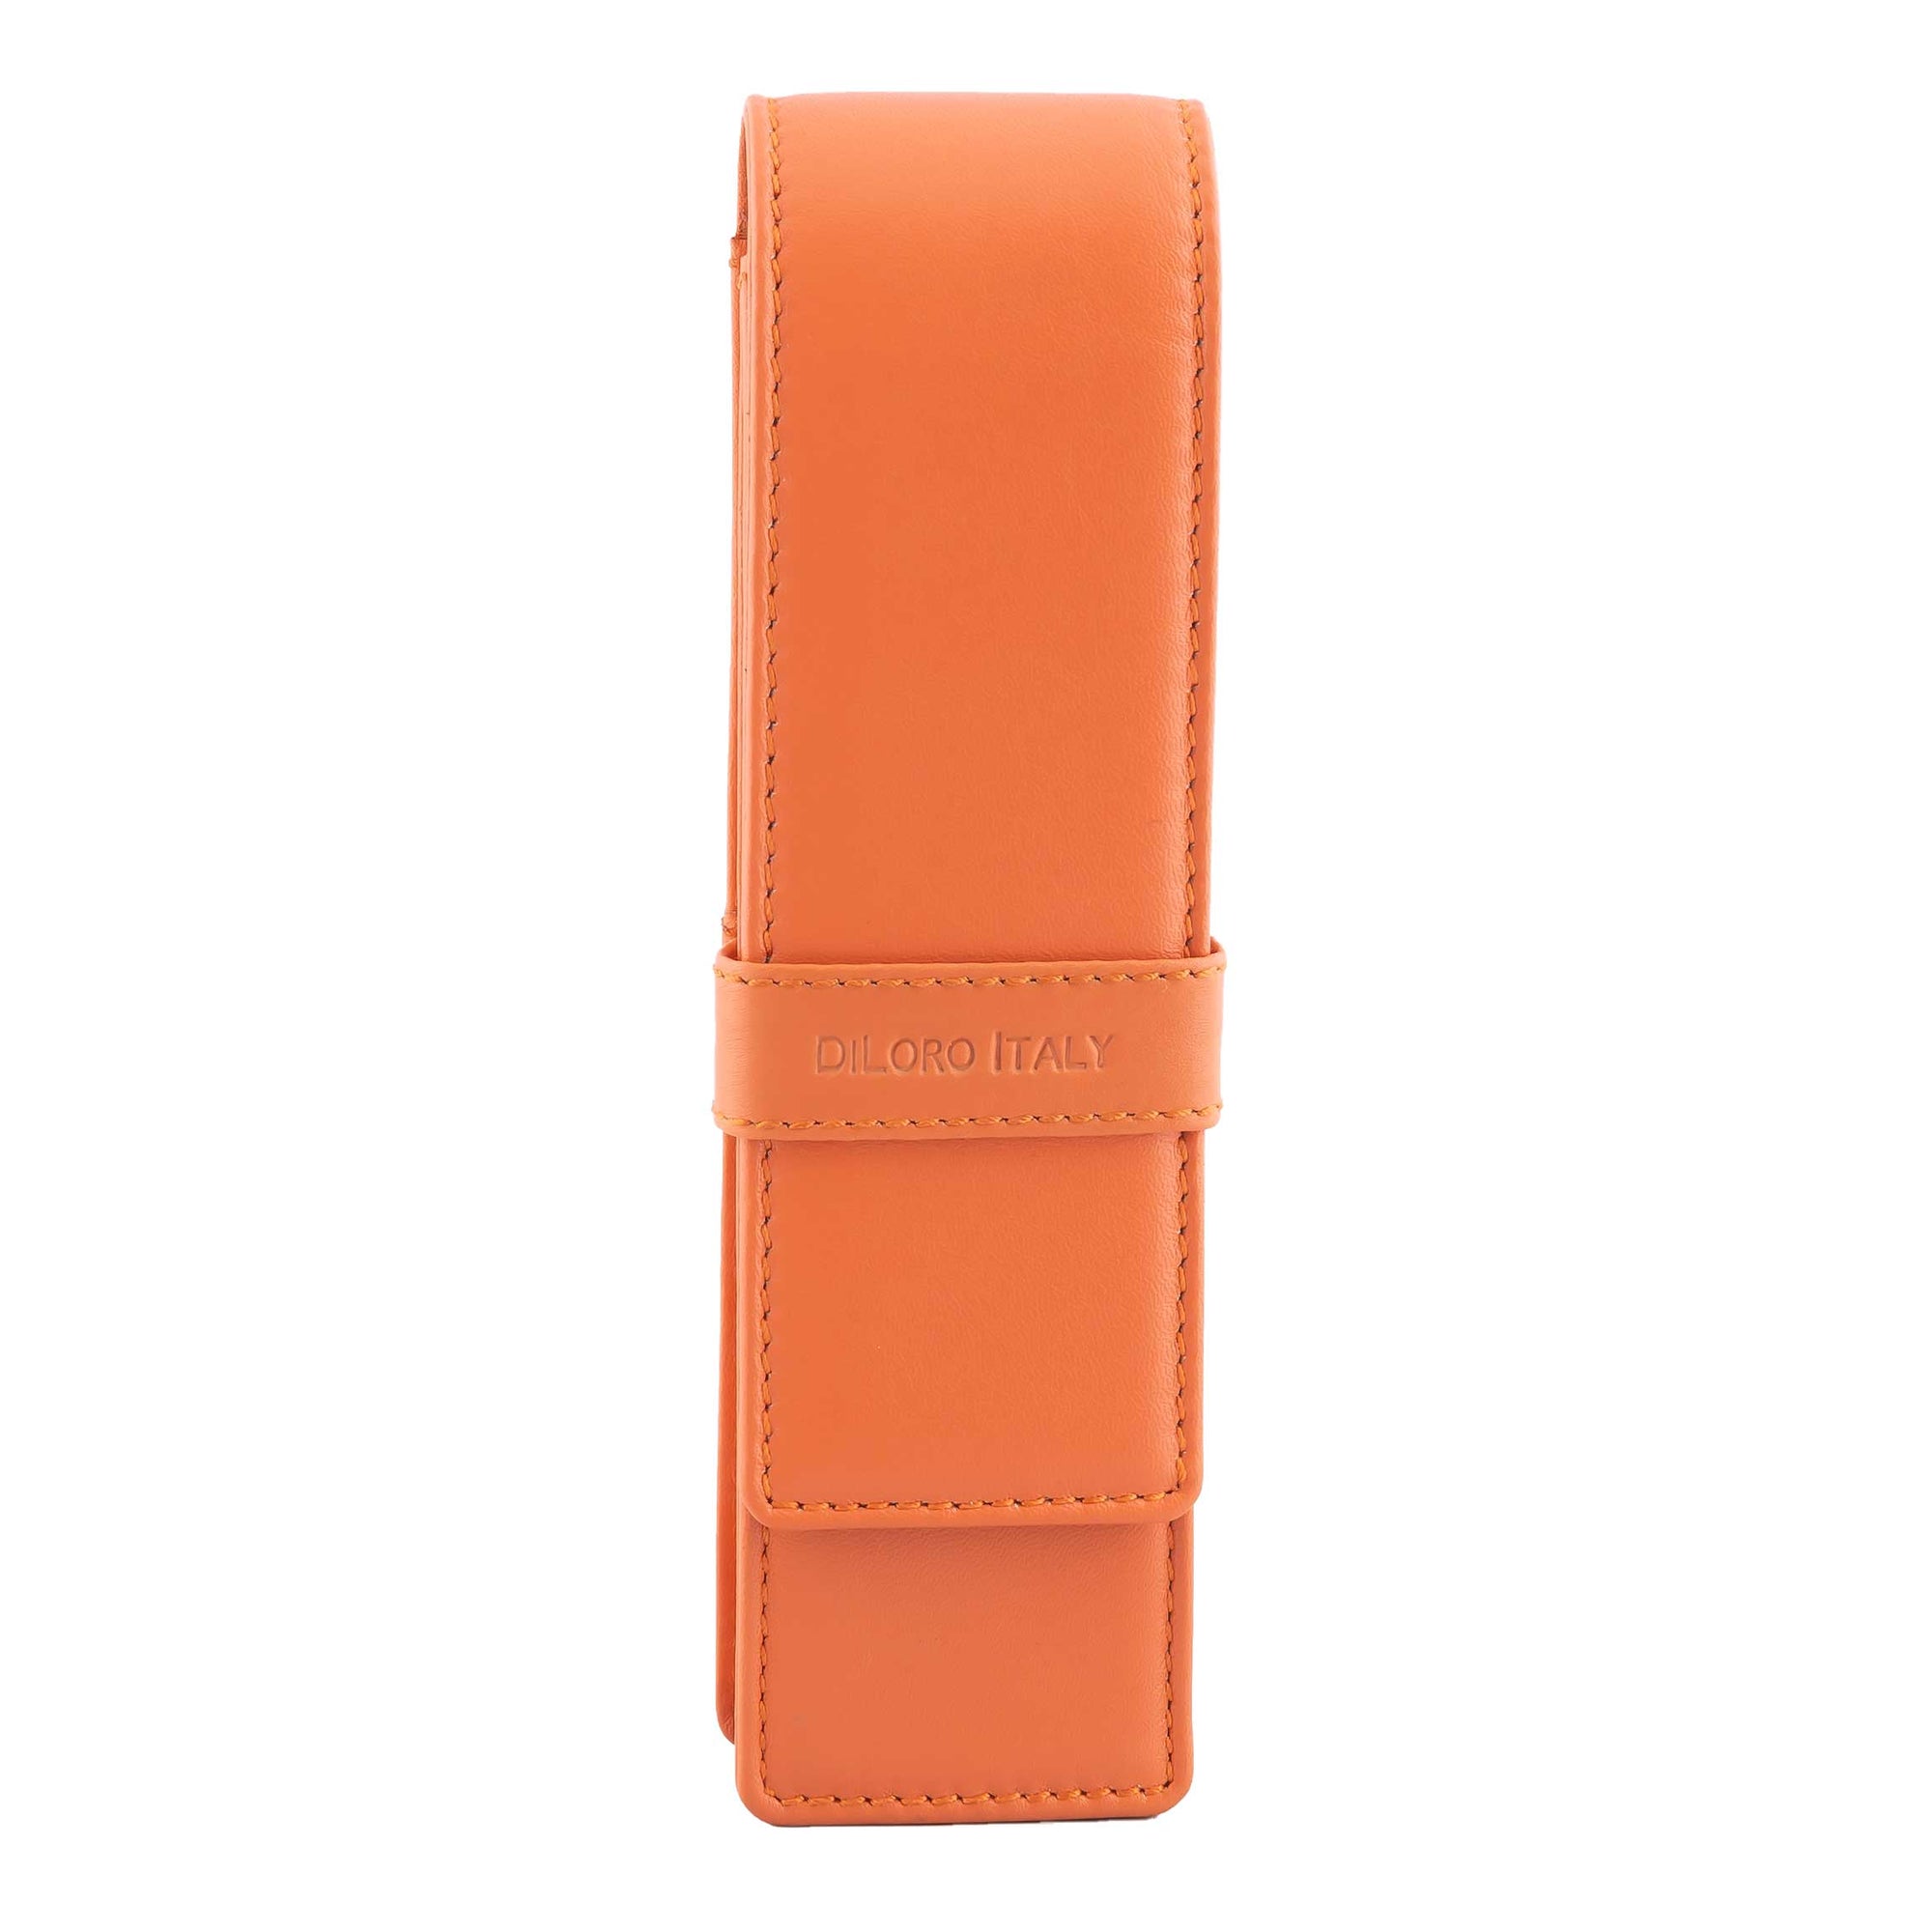 DiLoro Double Pen Case Holder in Top Quality, Full Grain Nappa Leather - Orange, Front